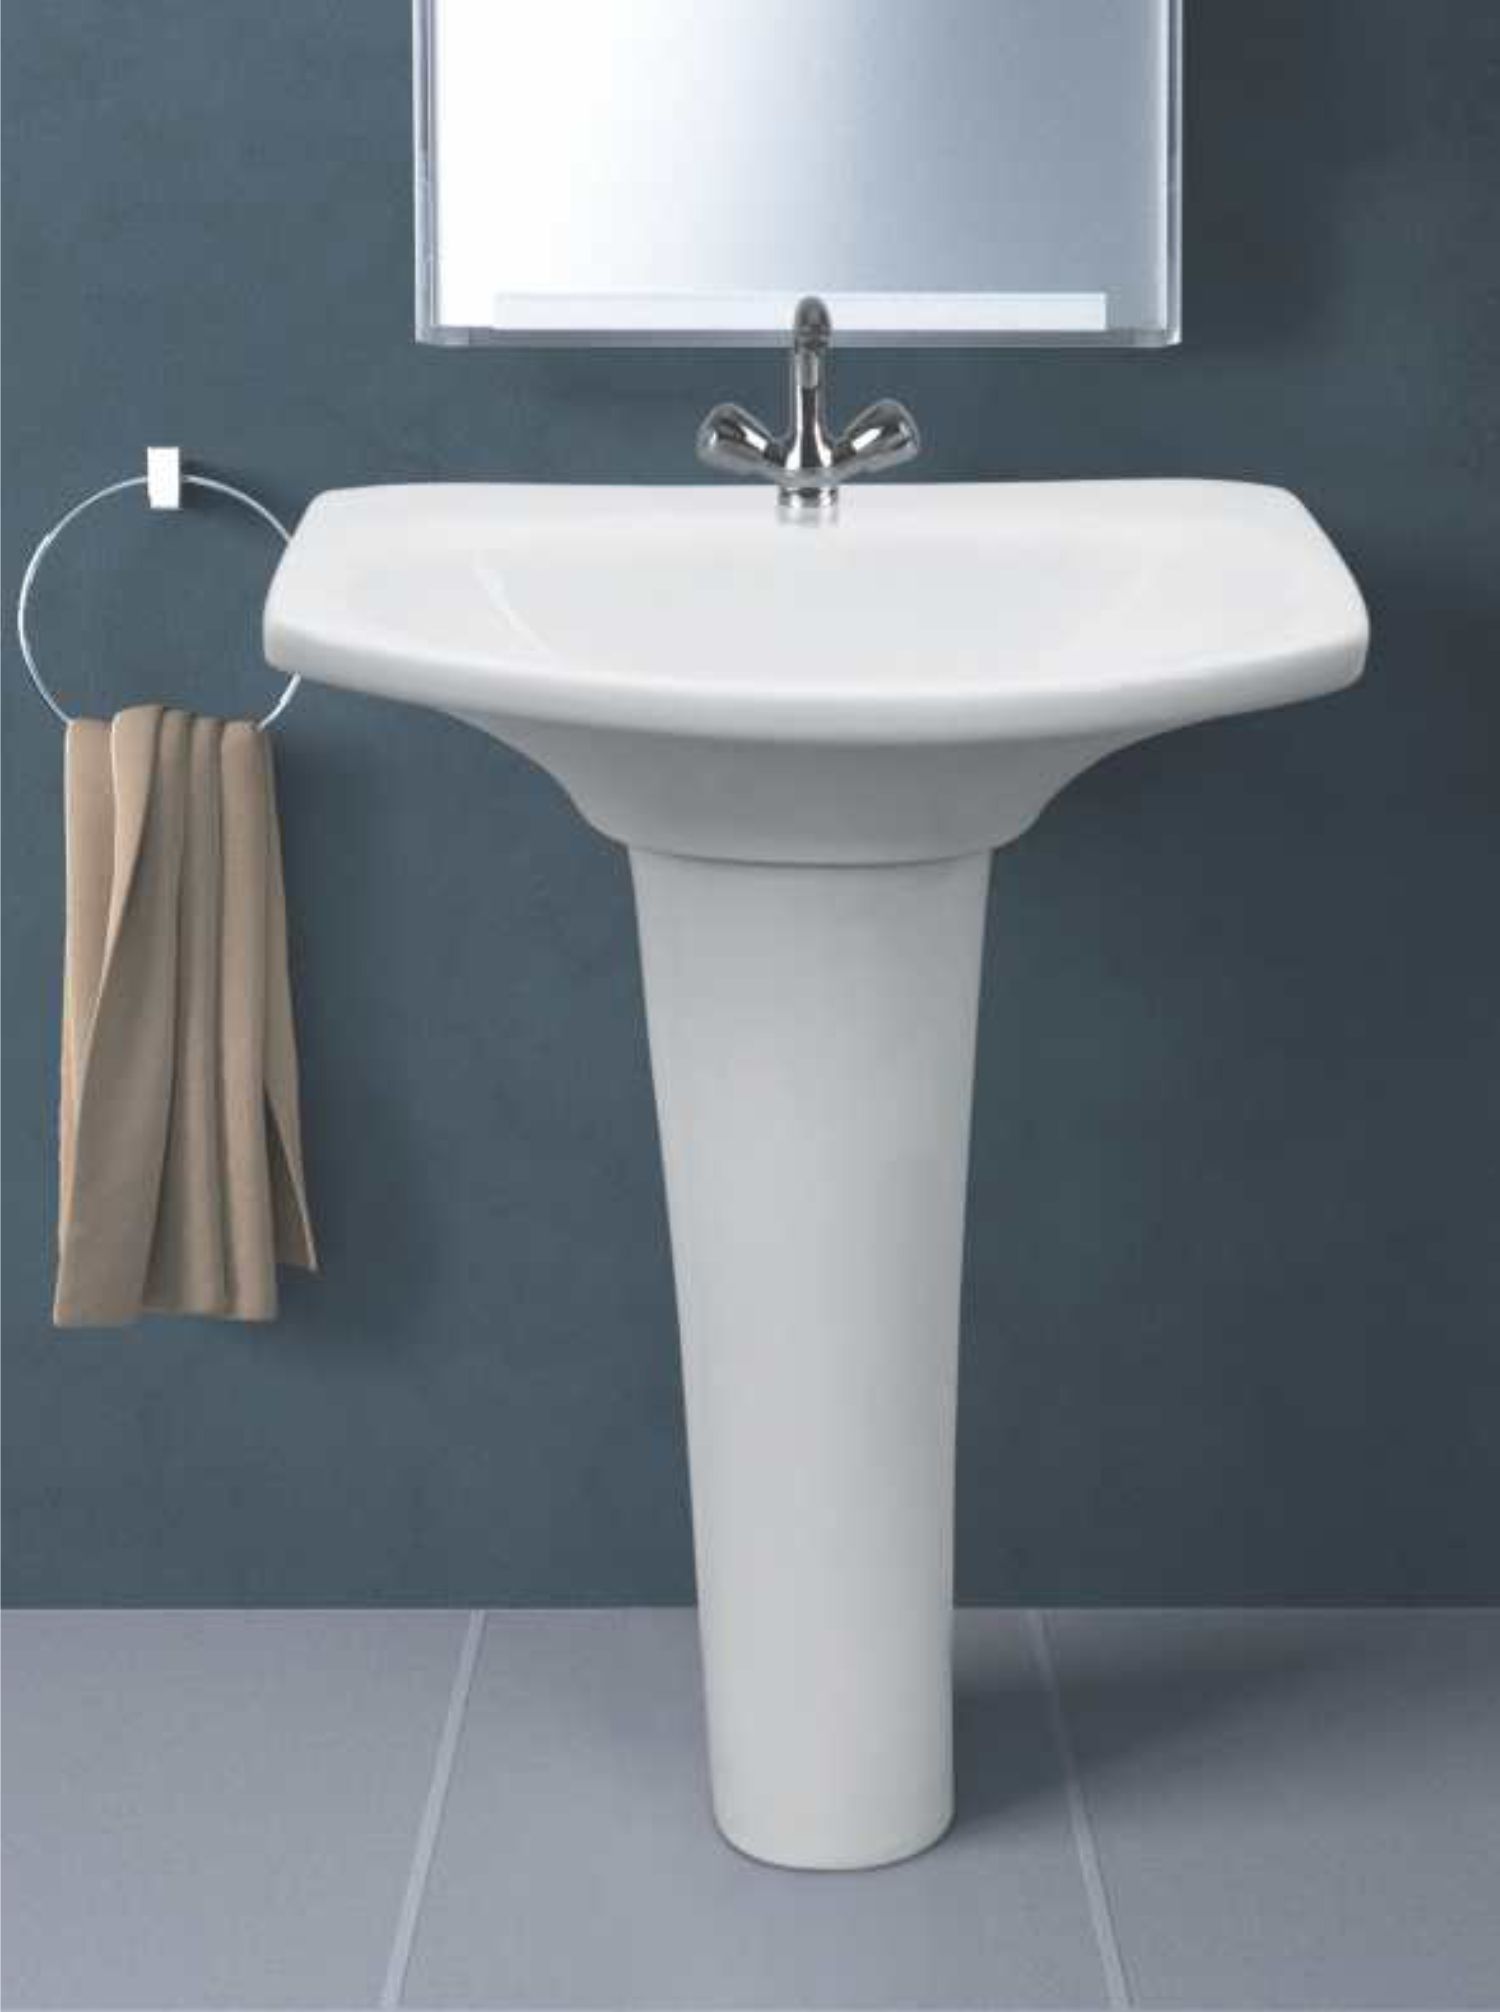 Wholesale Supplier of Wash Basin with Pedestals